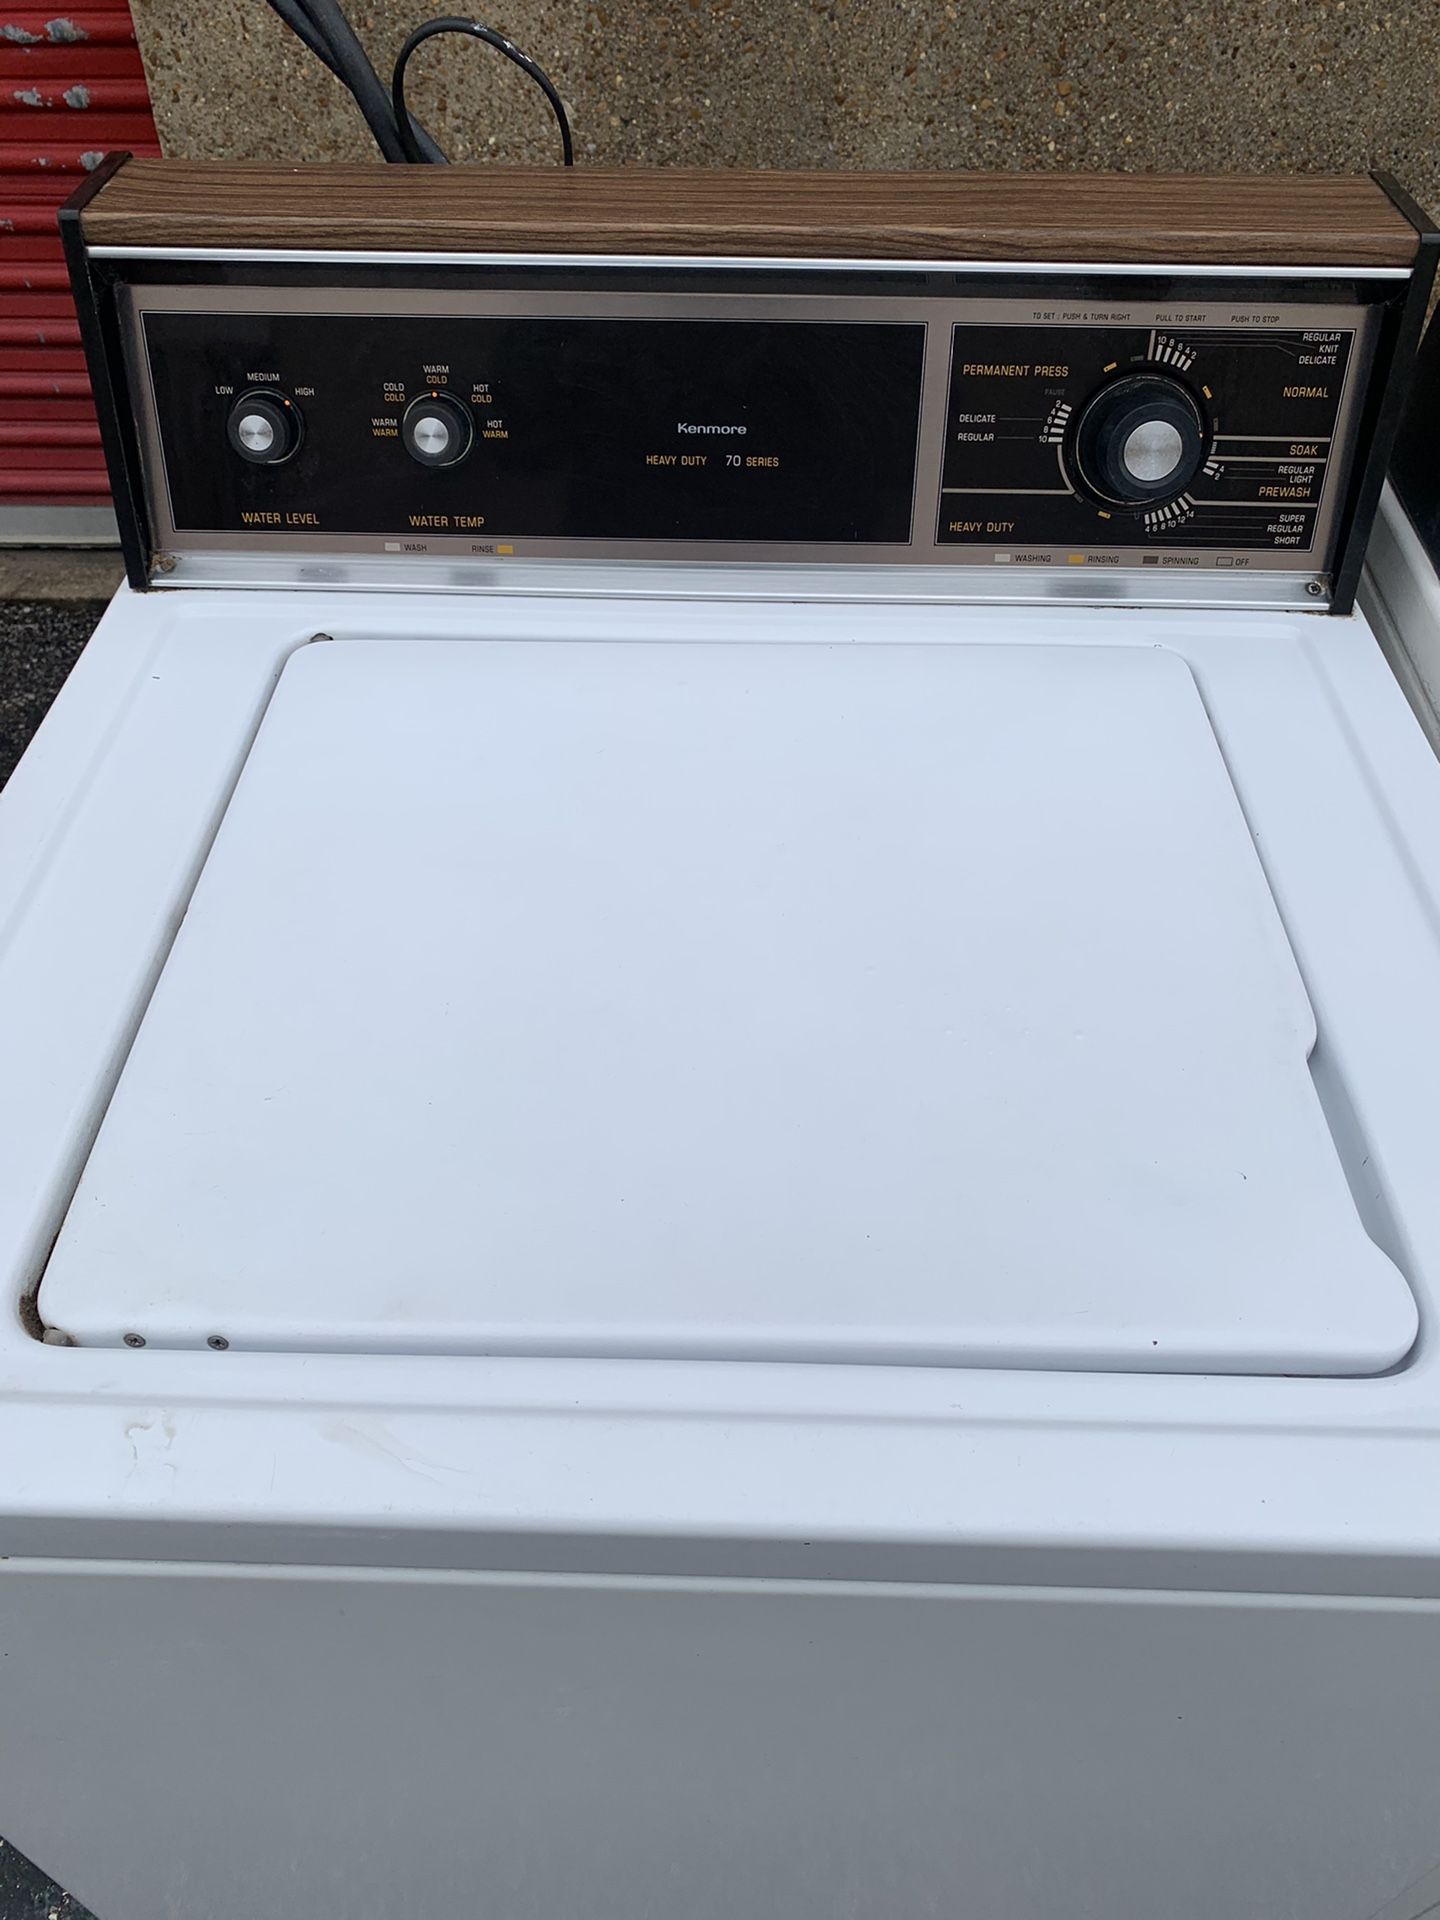 Kenmor washer and dryer